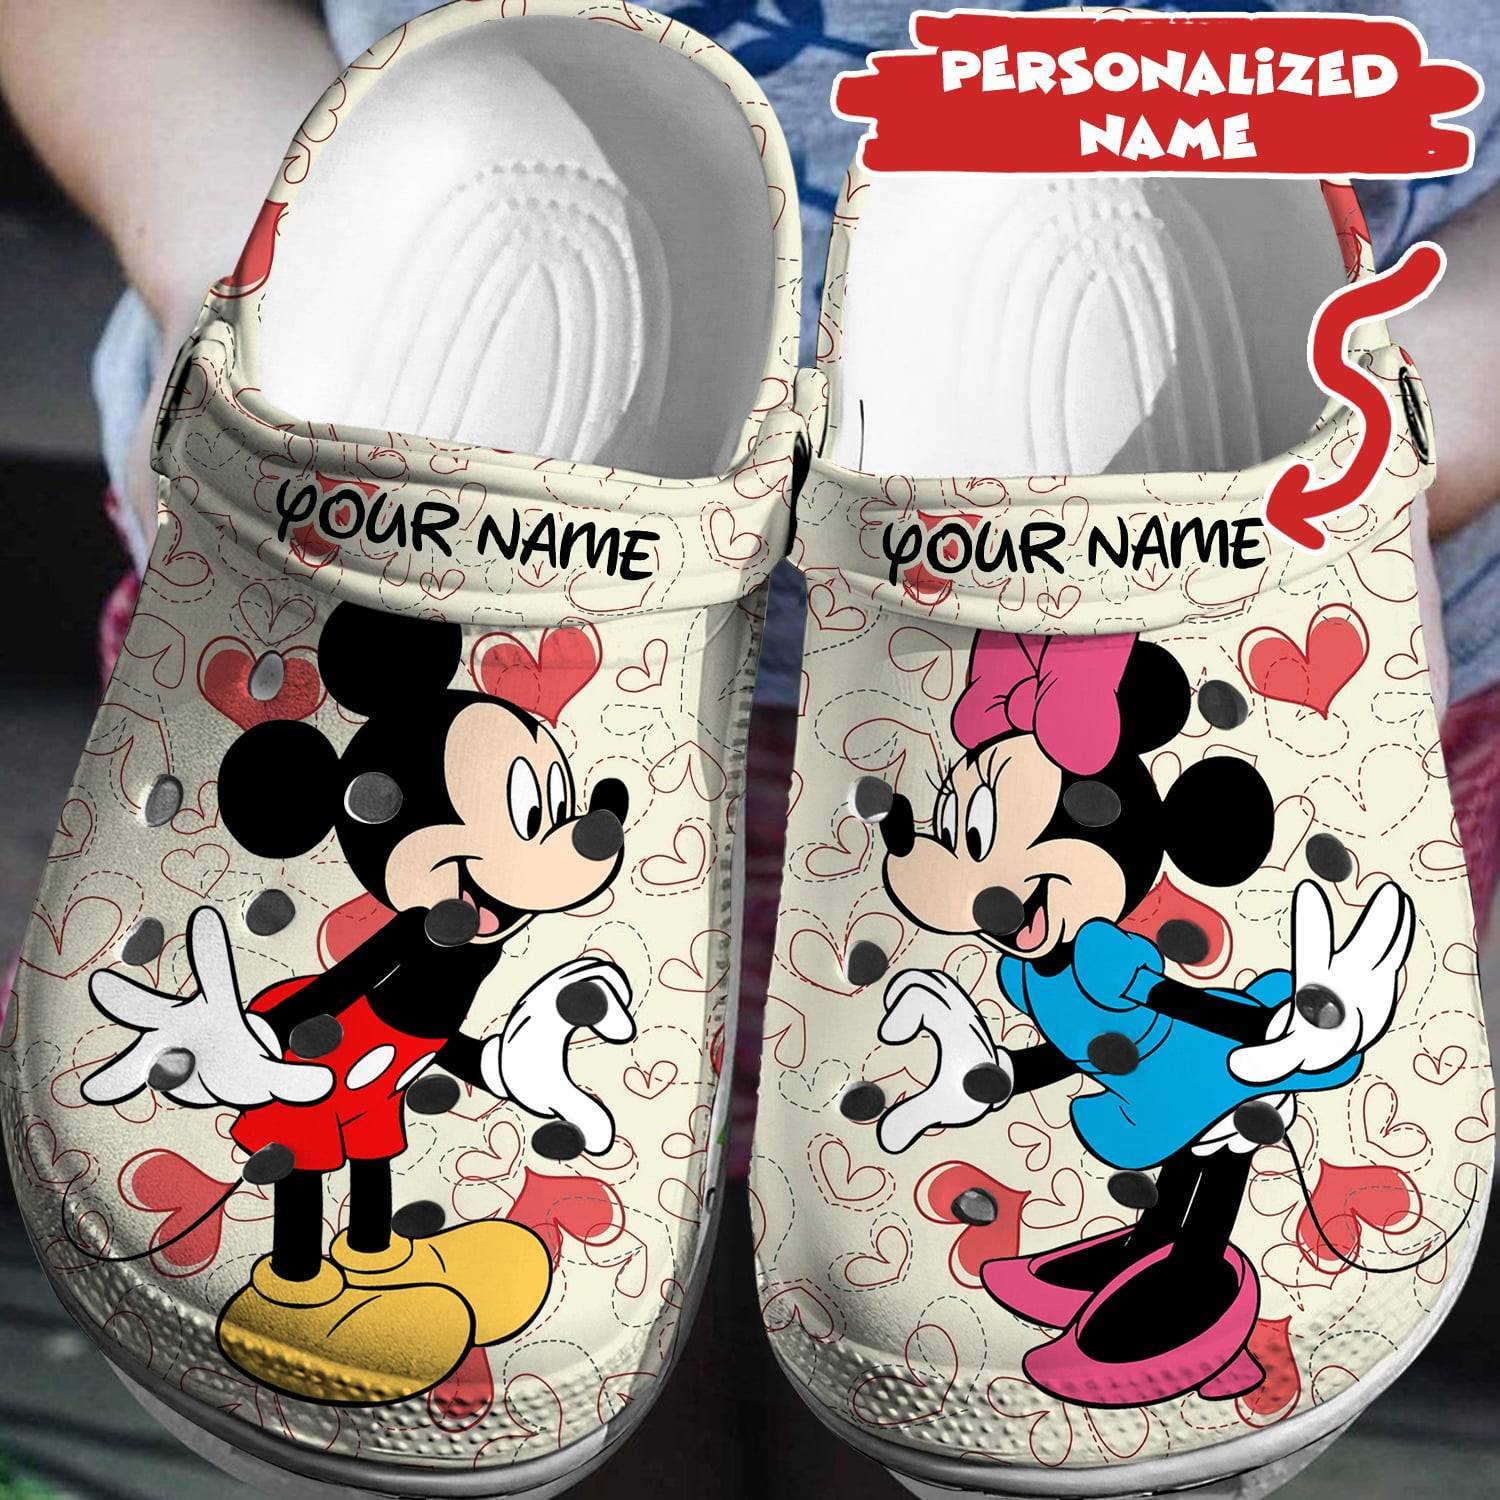 Create Your Disney Signature: Personalized Mickey Minnie Crocs 3D Clog Shoes